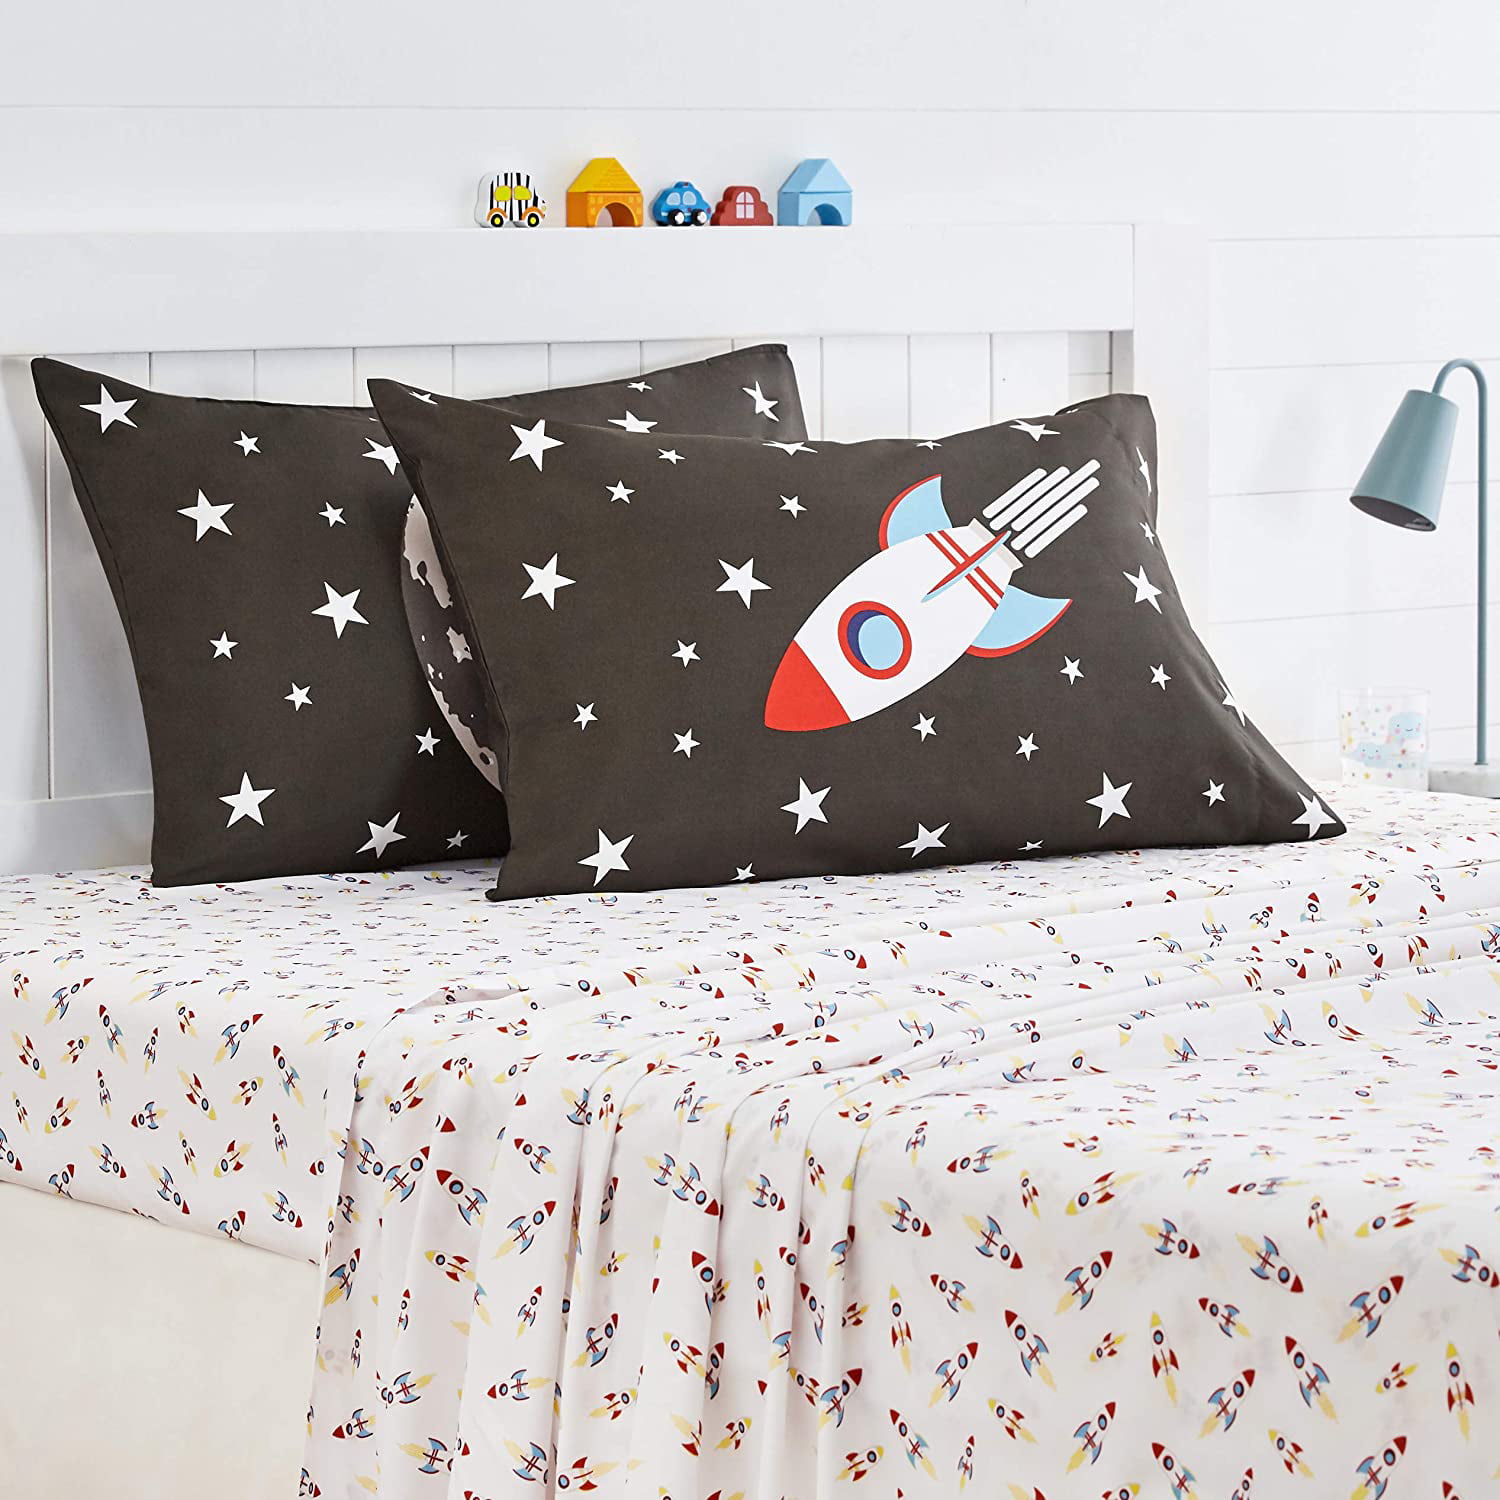 Space Rocket Full/Queen SLEEP ZONE Kids Comforter and Pillow Sham Set Easy-Wash Ultra Soft Brushed Microfiber Fade Resistant 3 Piece 